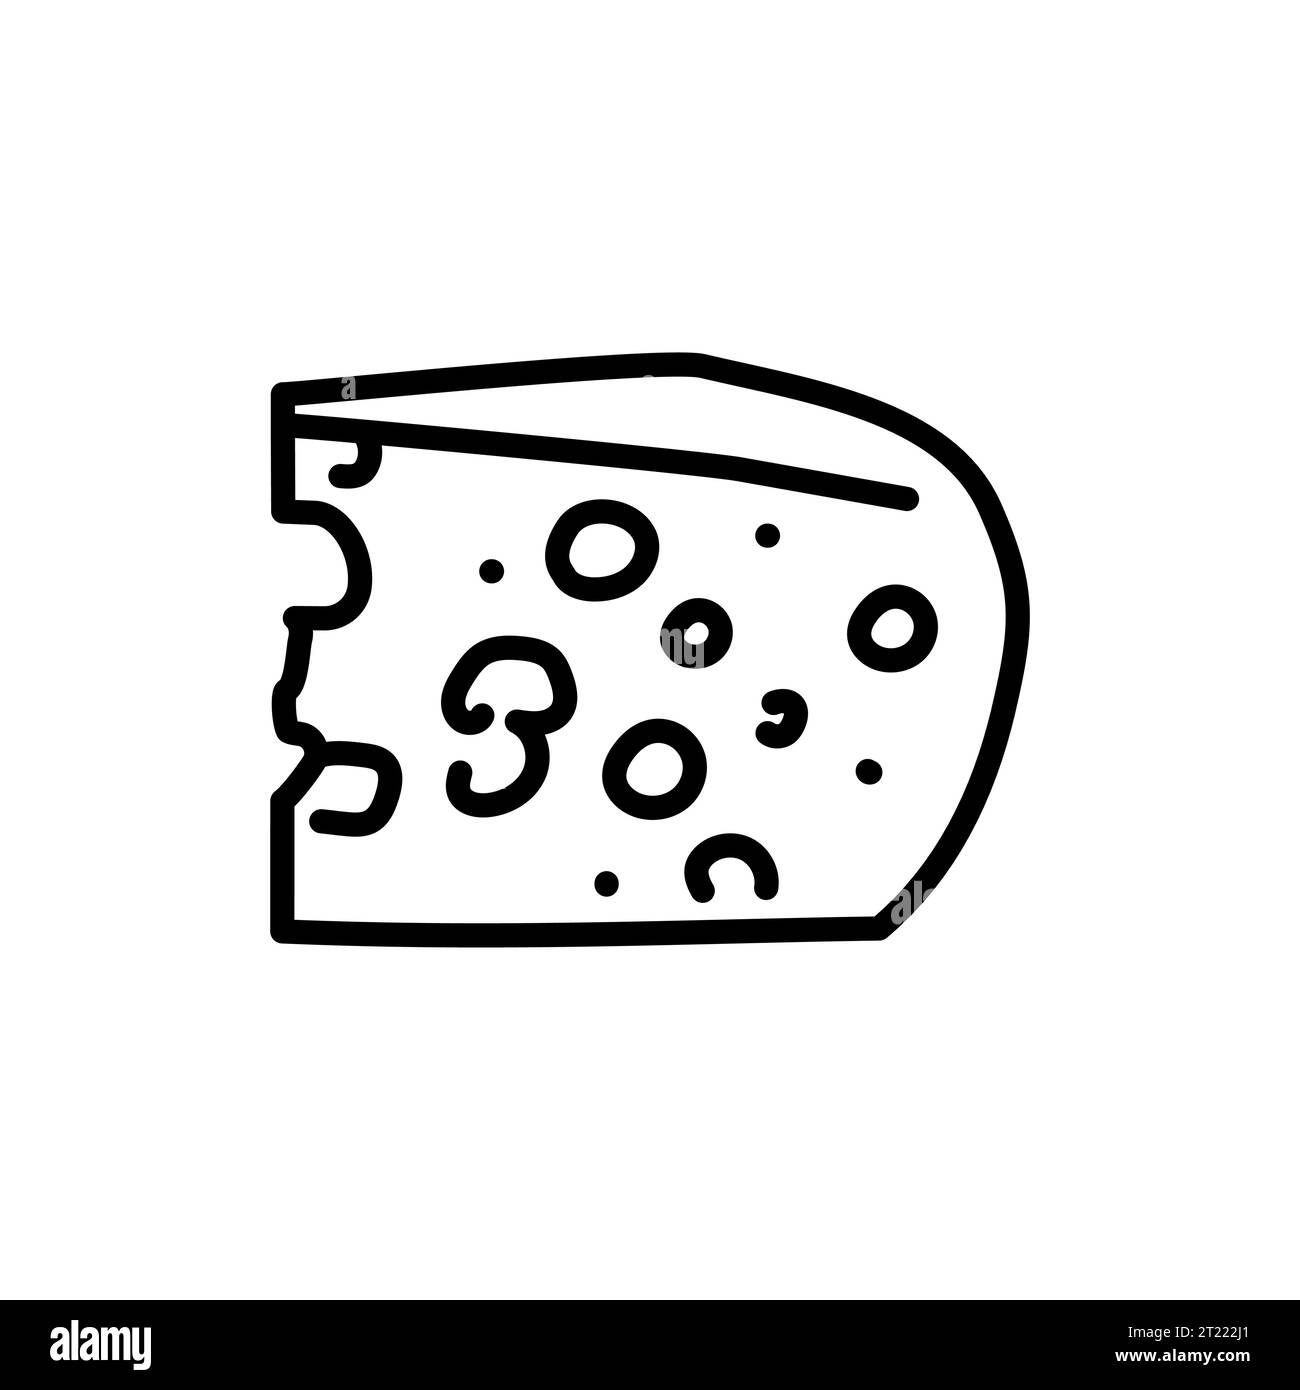 Maasdam cheese sign olor line icon. Pictogram for web page. Stock Vector